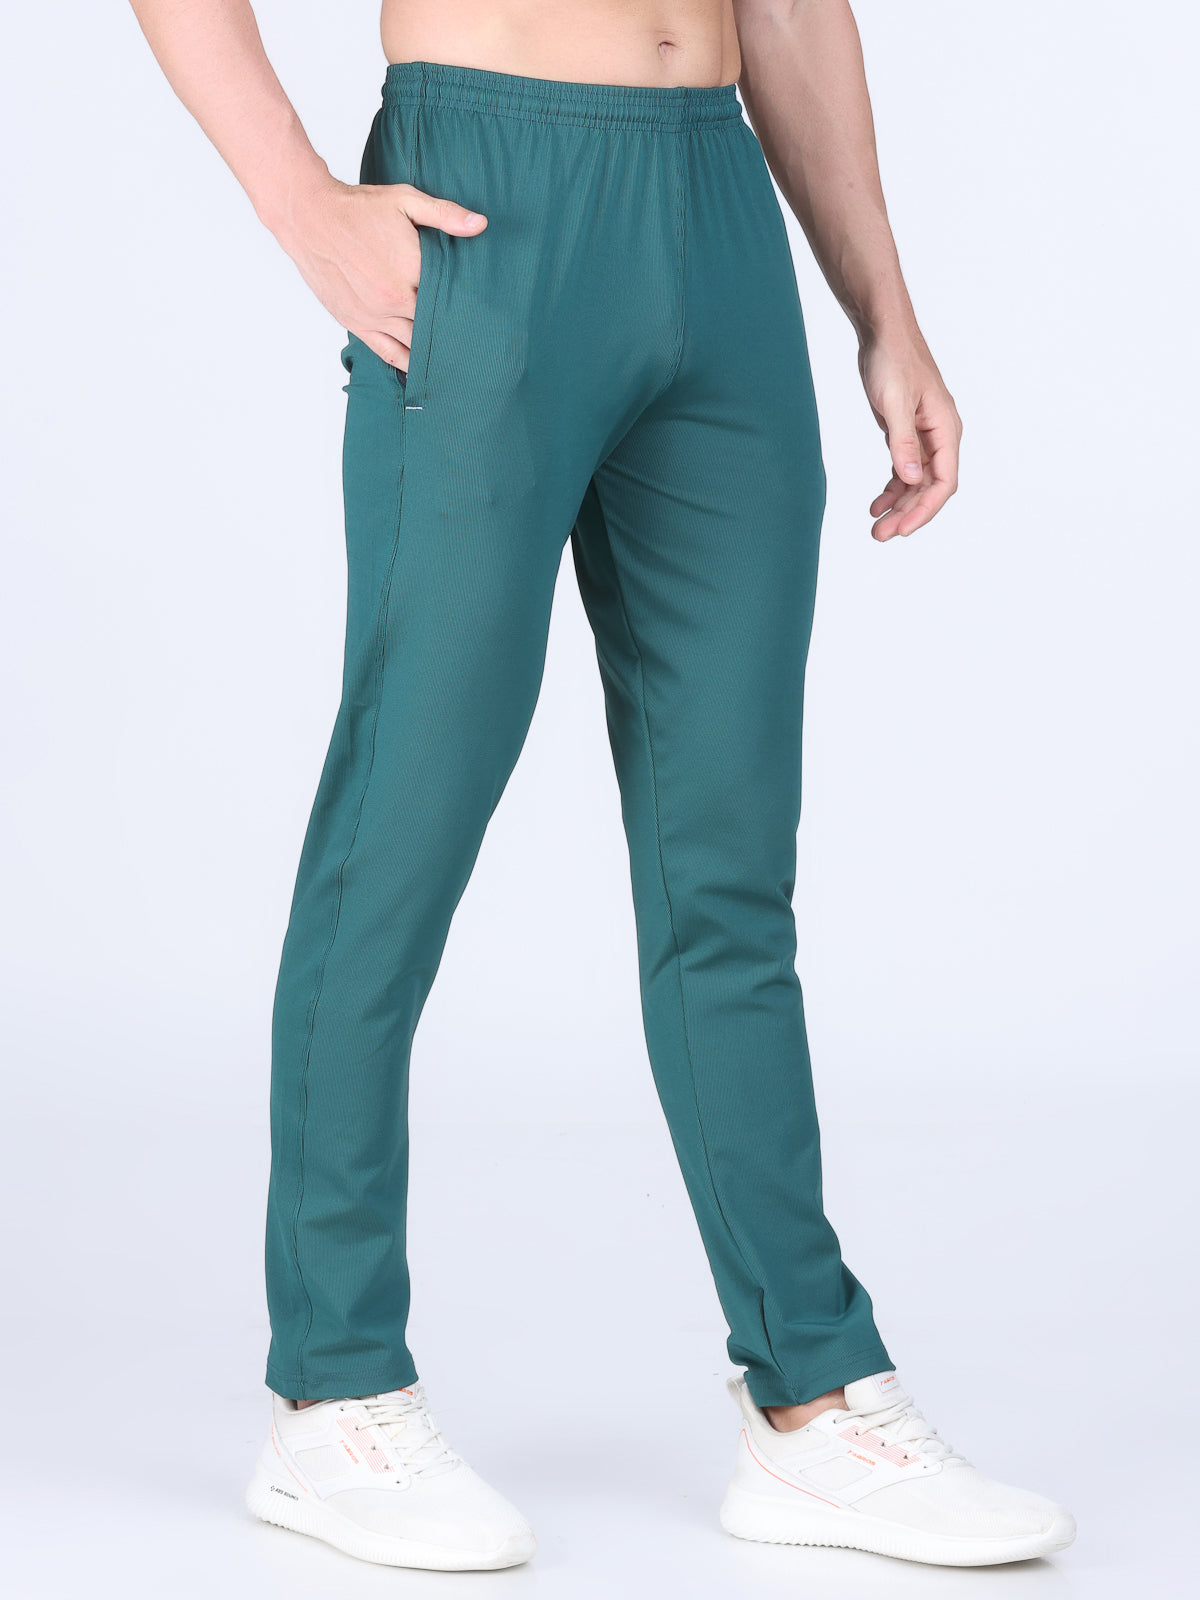 Combo of 2 Men's 4 Way Stretch Lining Bottle Green and Coffee Track Pant